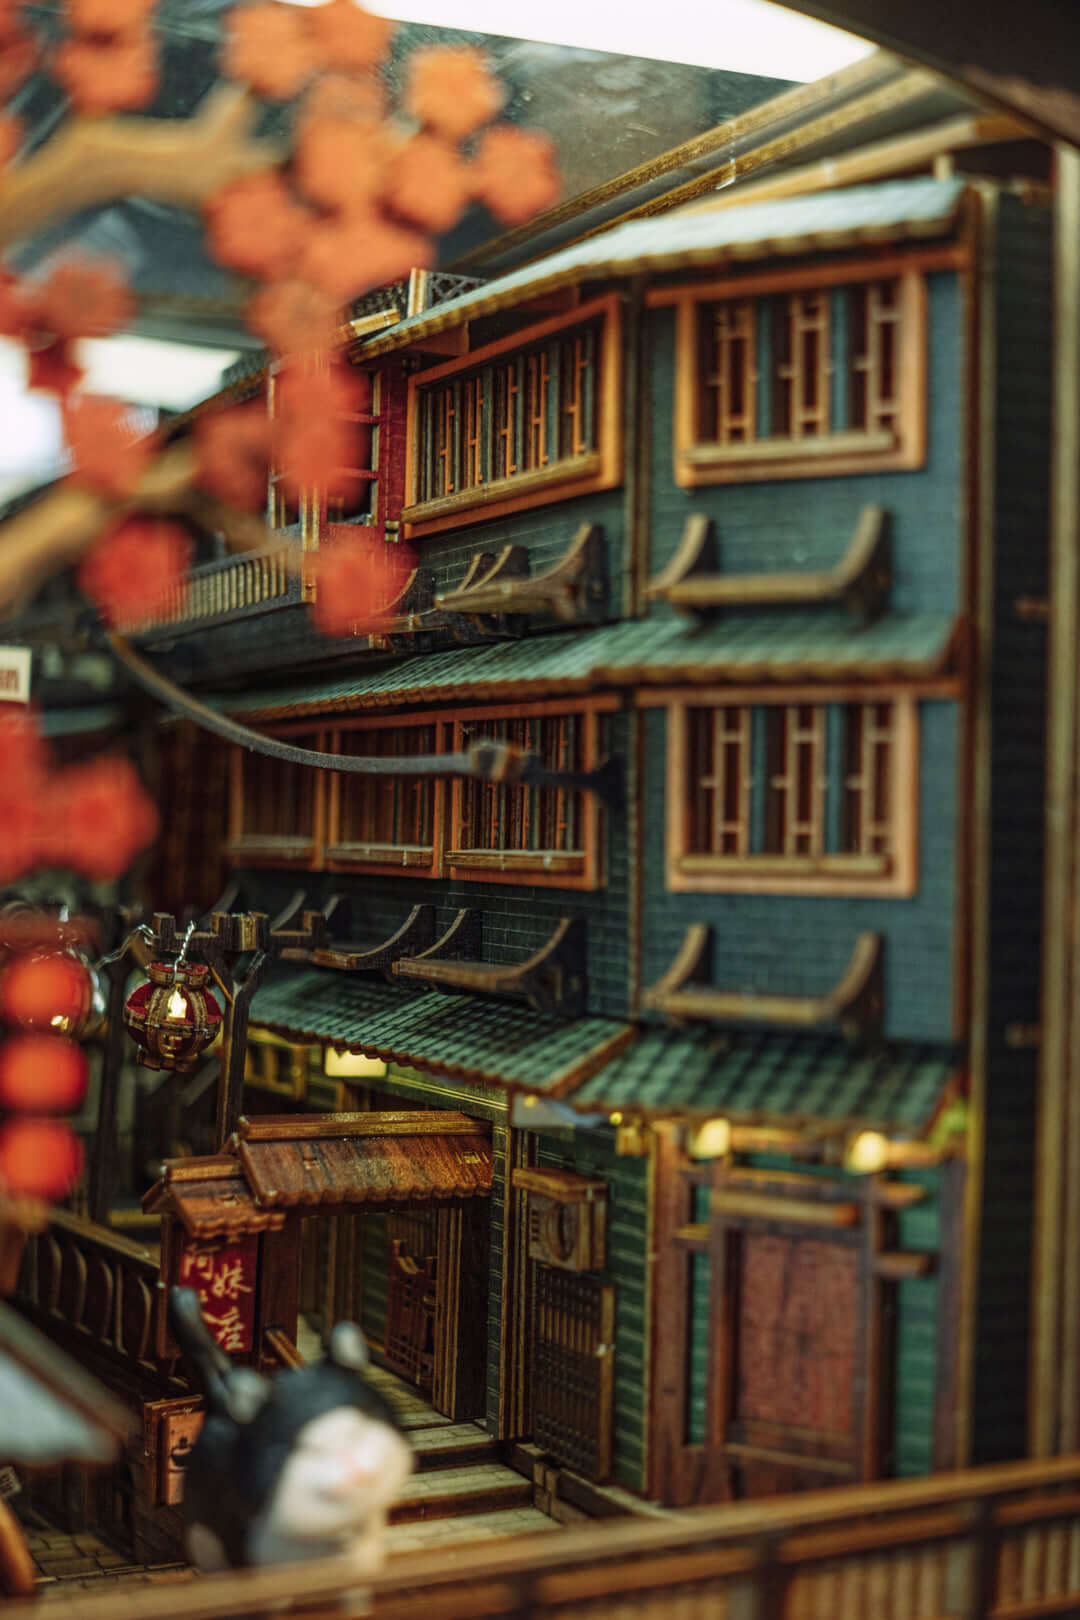 JiuFen Old Street DIY book nook kit featuring traditional Chinese architecture with cherry blossoms and vibrant lanterns.